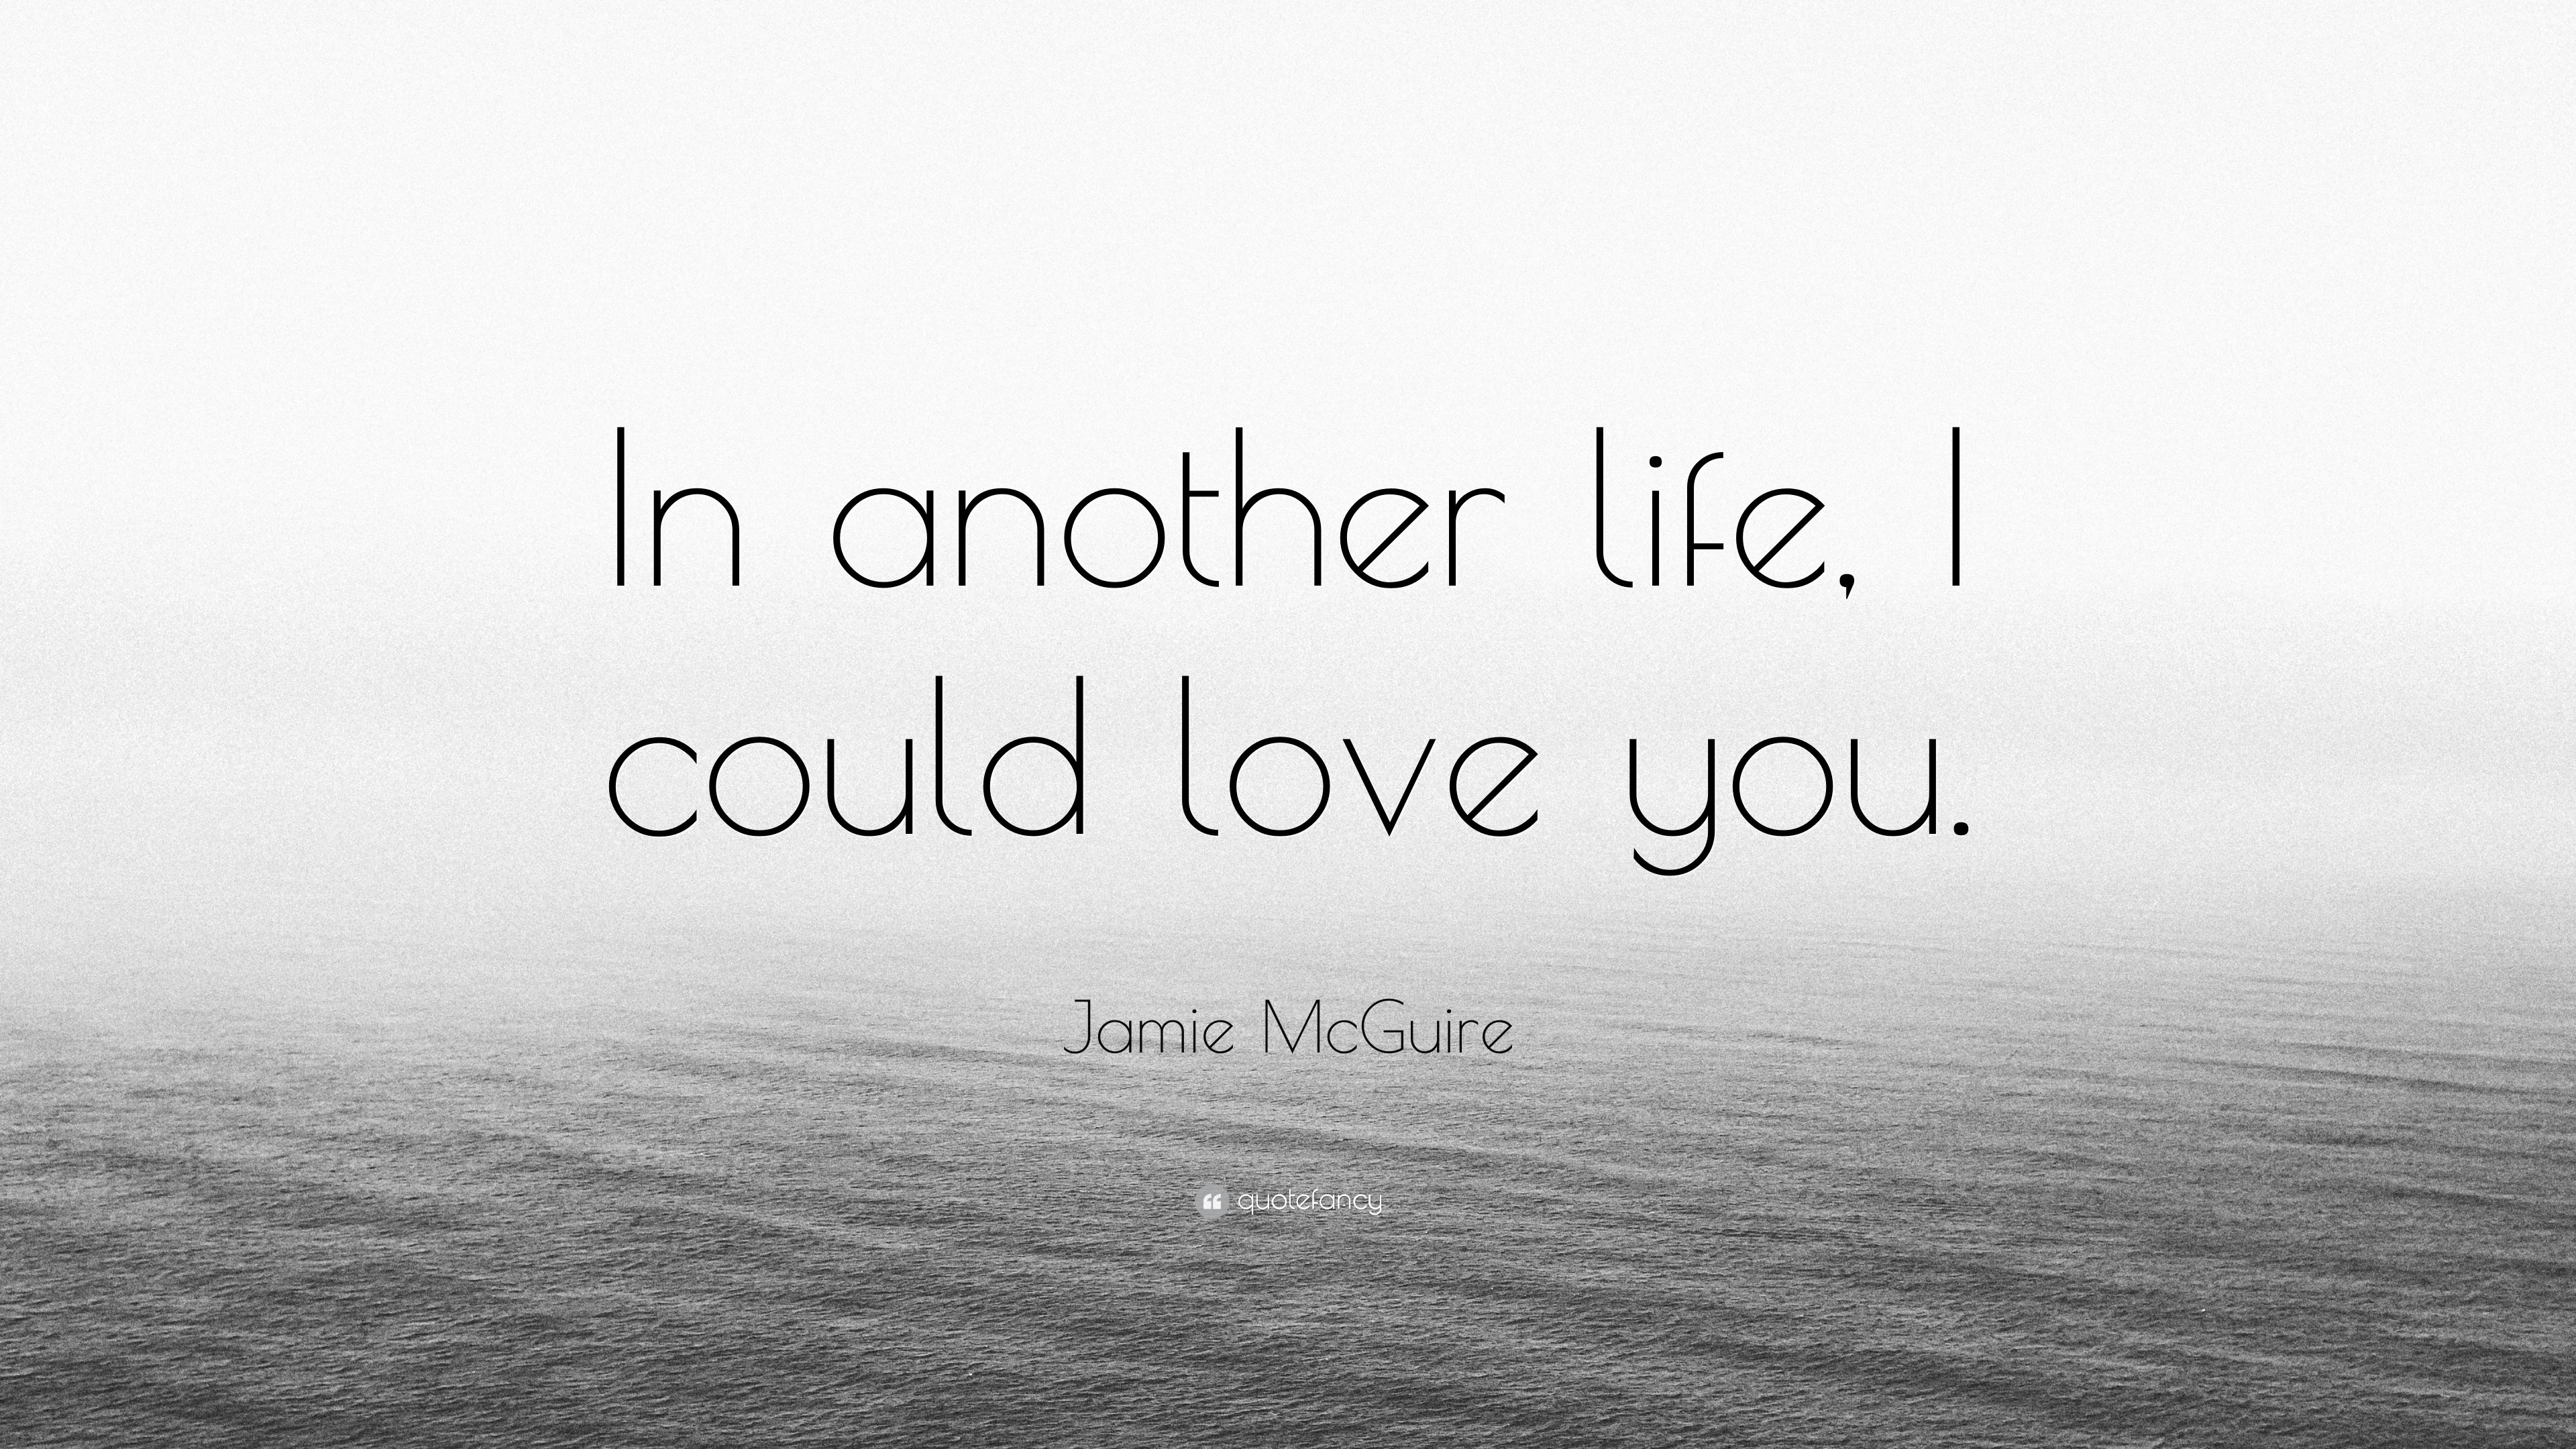 Jamie McGuire Quote: “In another life, I could love you.”